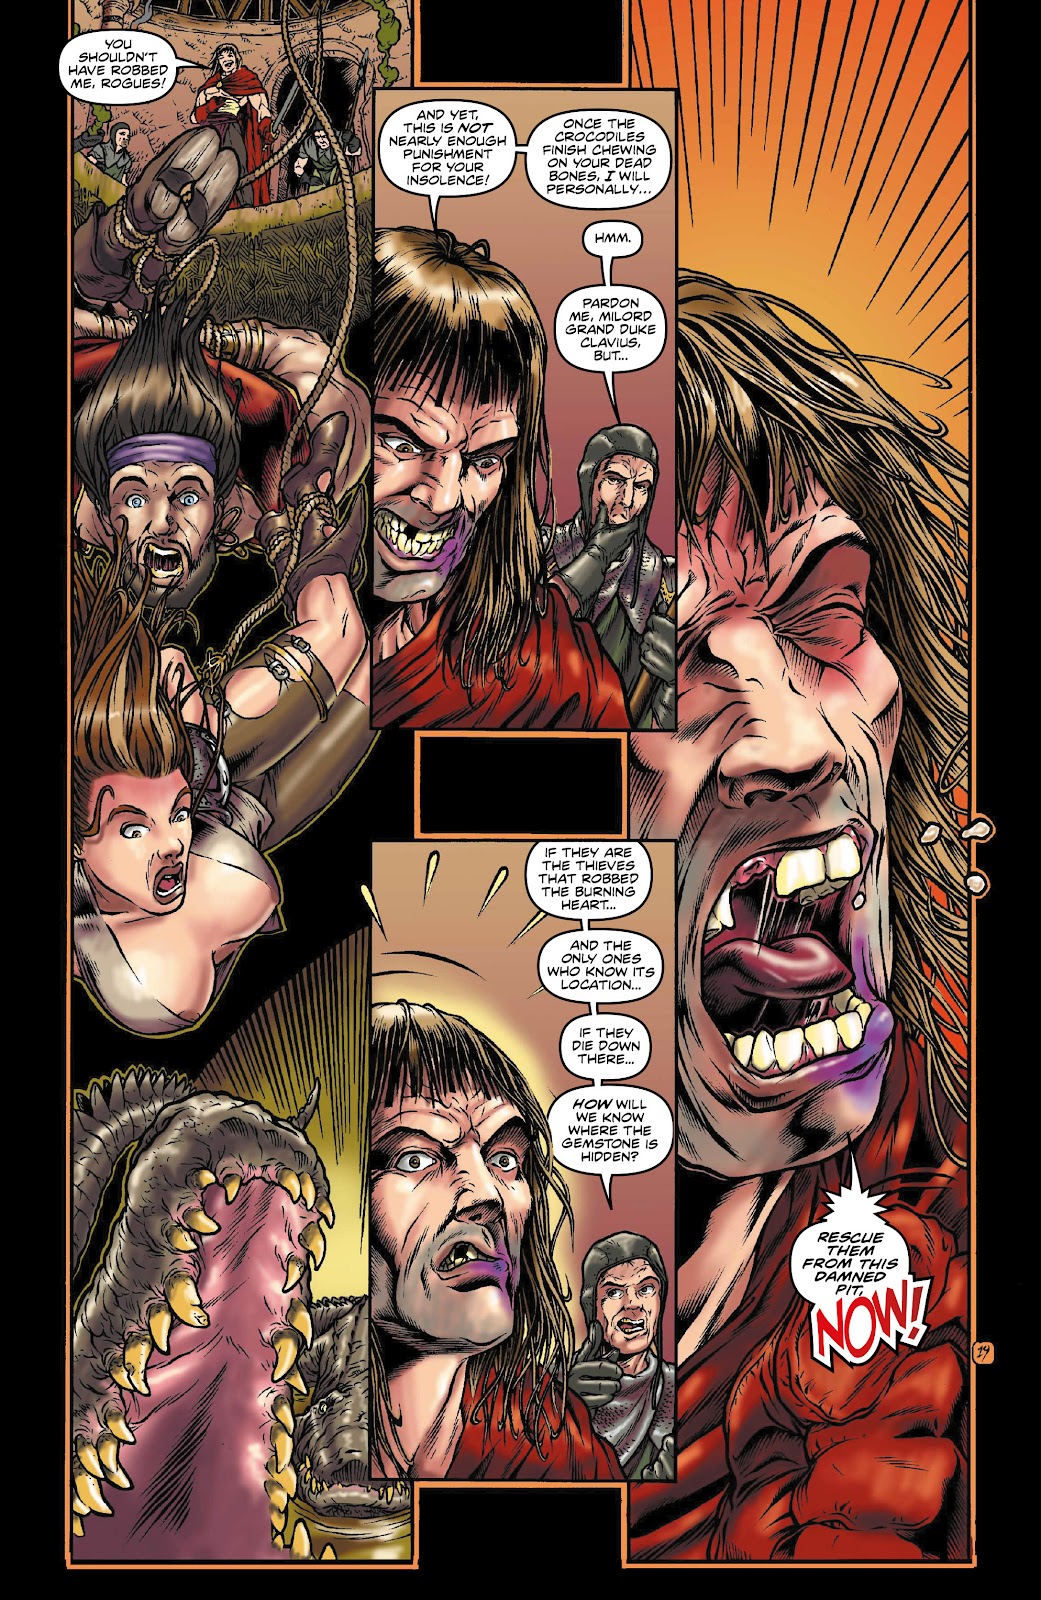 Rogues!: The Burning Heart issue 2 - Page 3